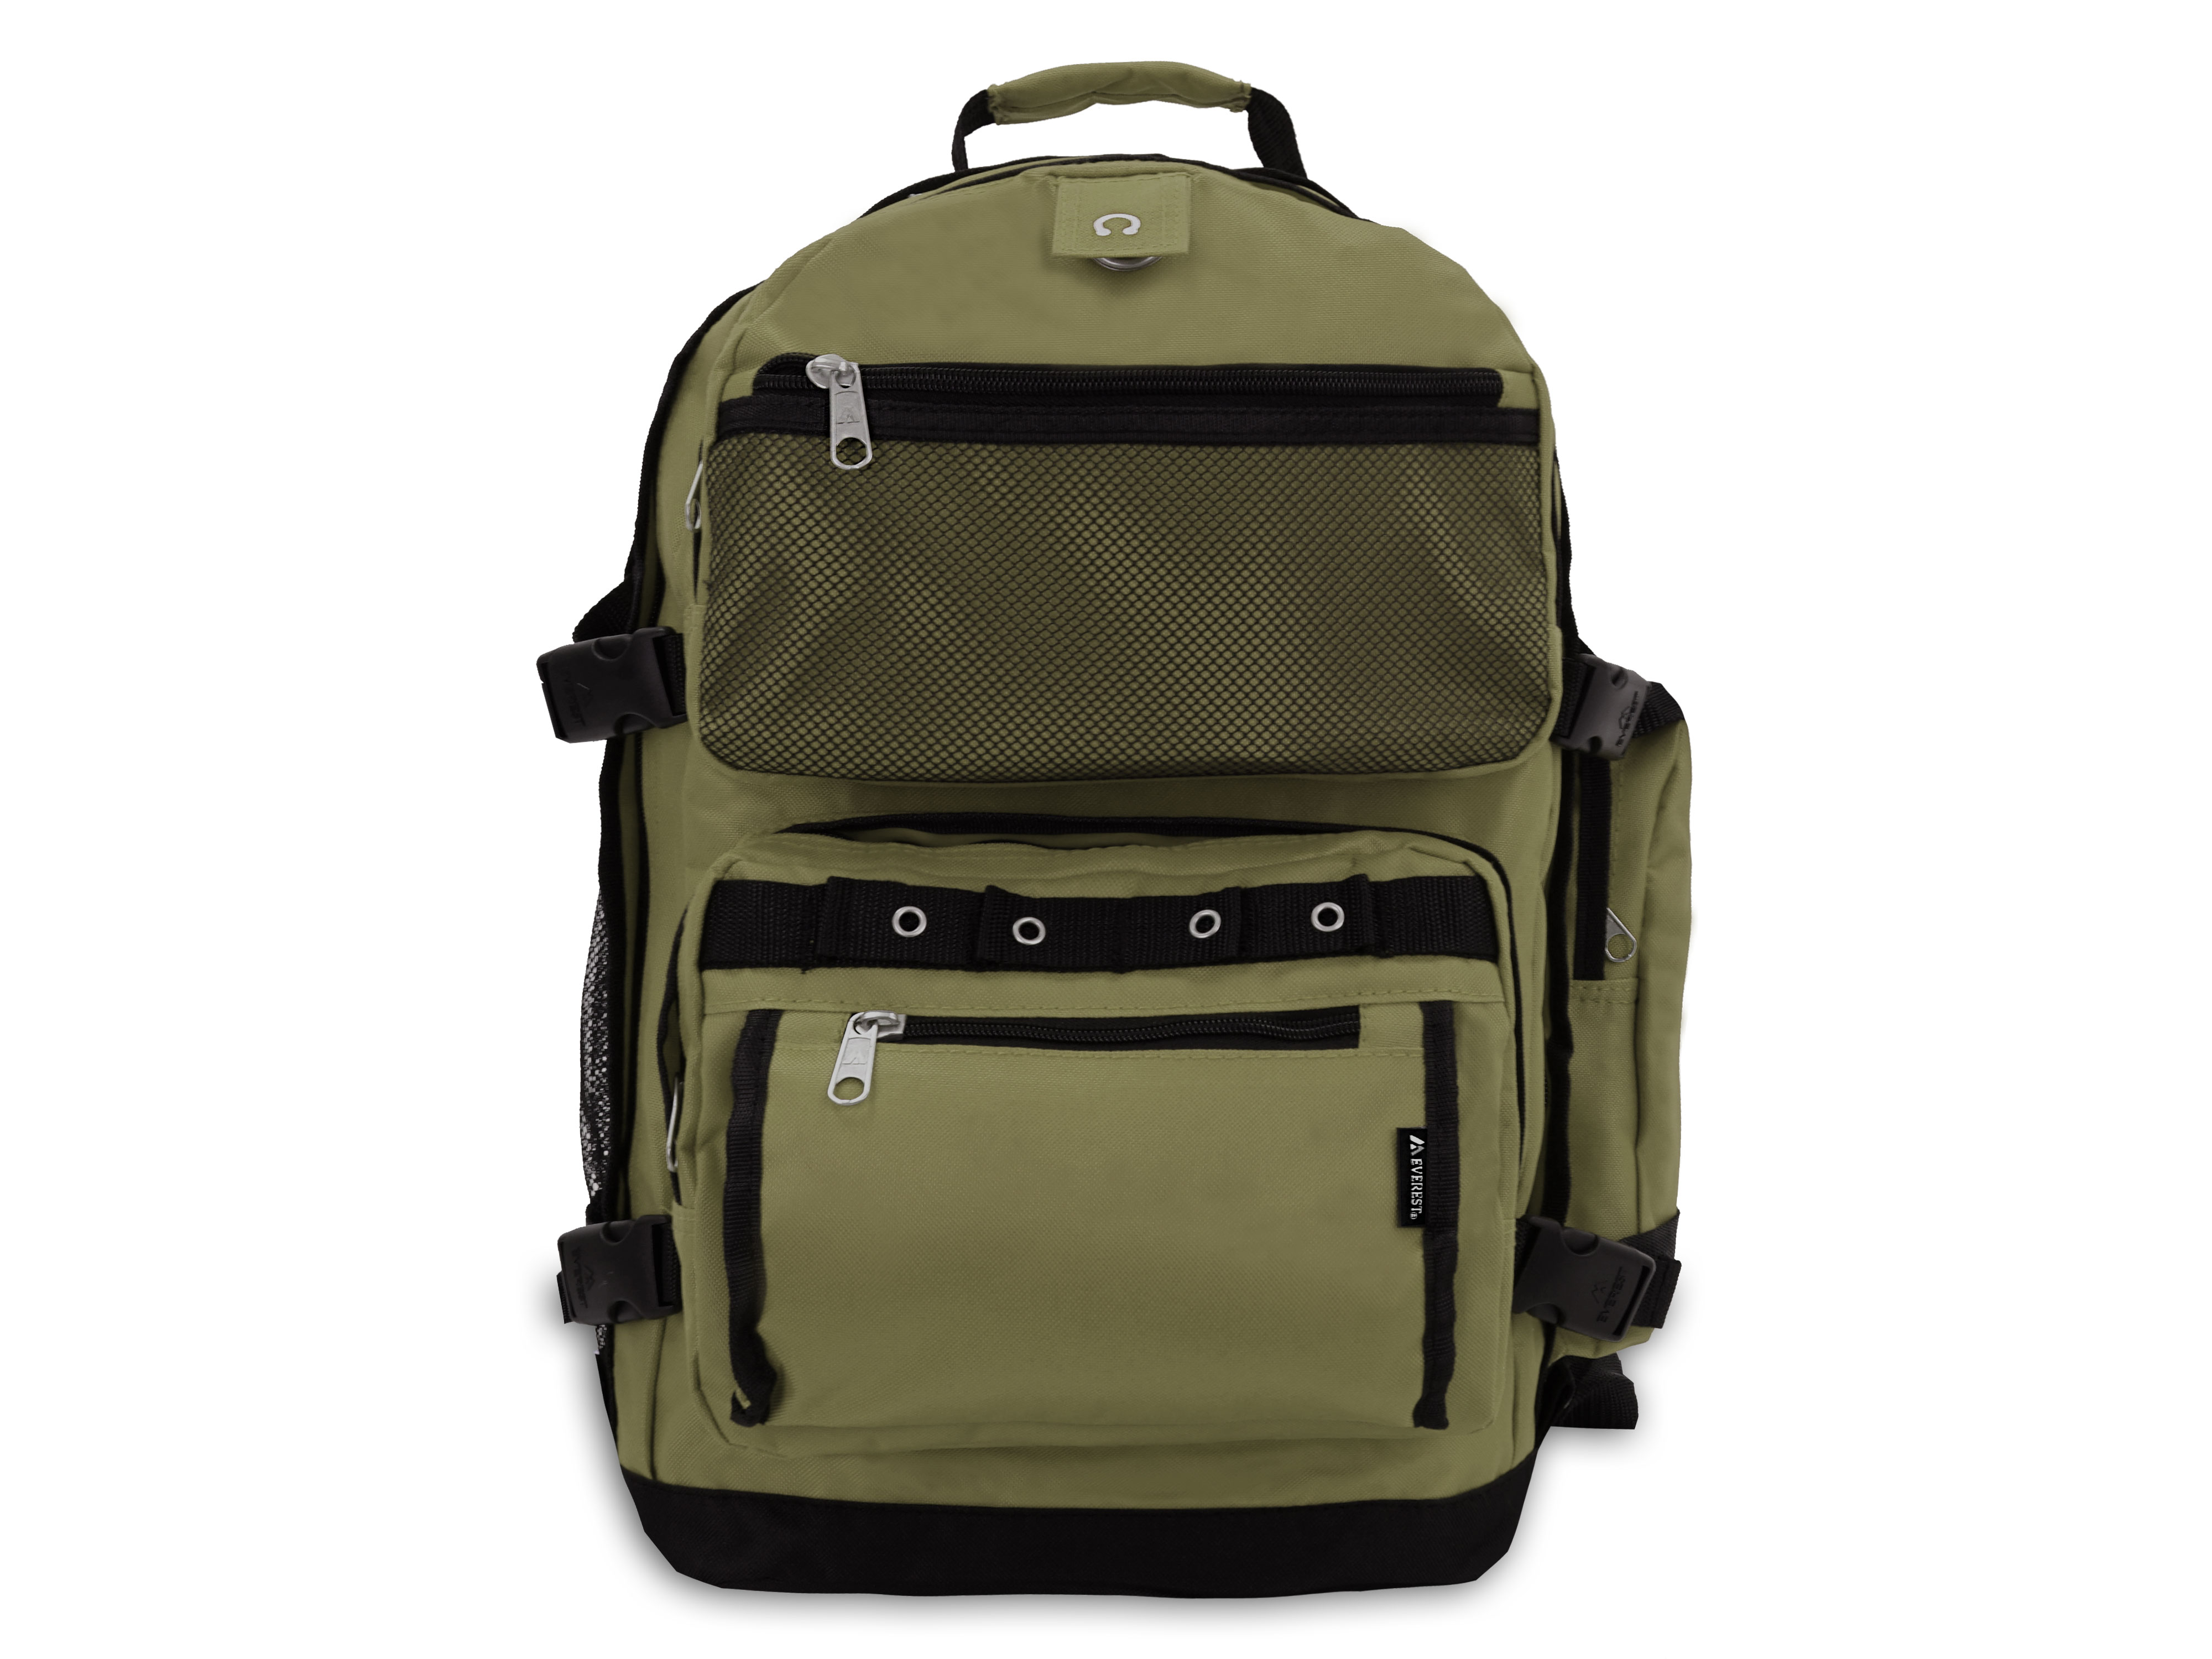 Everest 20" Oversized Deluxe Backpack, Olive All Ages, Unisex 3045R-OLI/BK, Carrier and Shoulder Book Bag for School, Work, Sports, and Travel - image 1 of 5